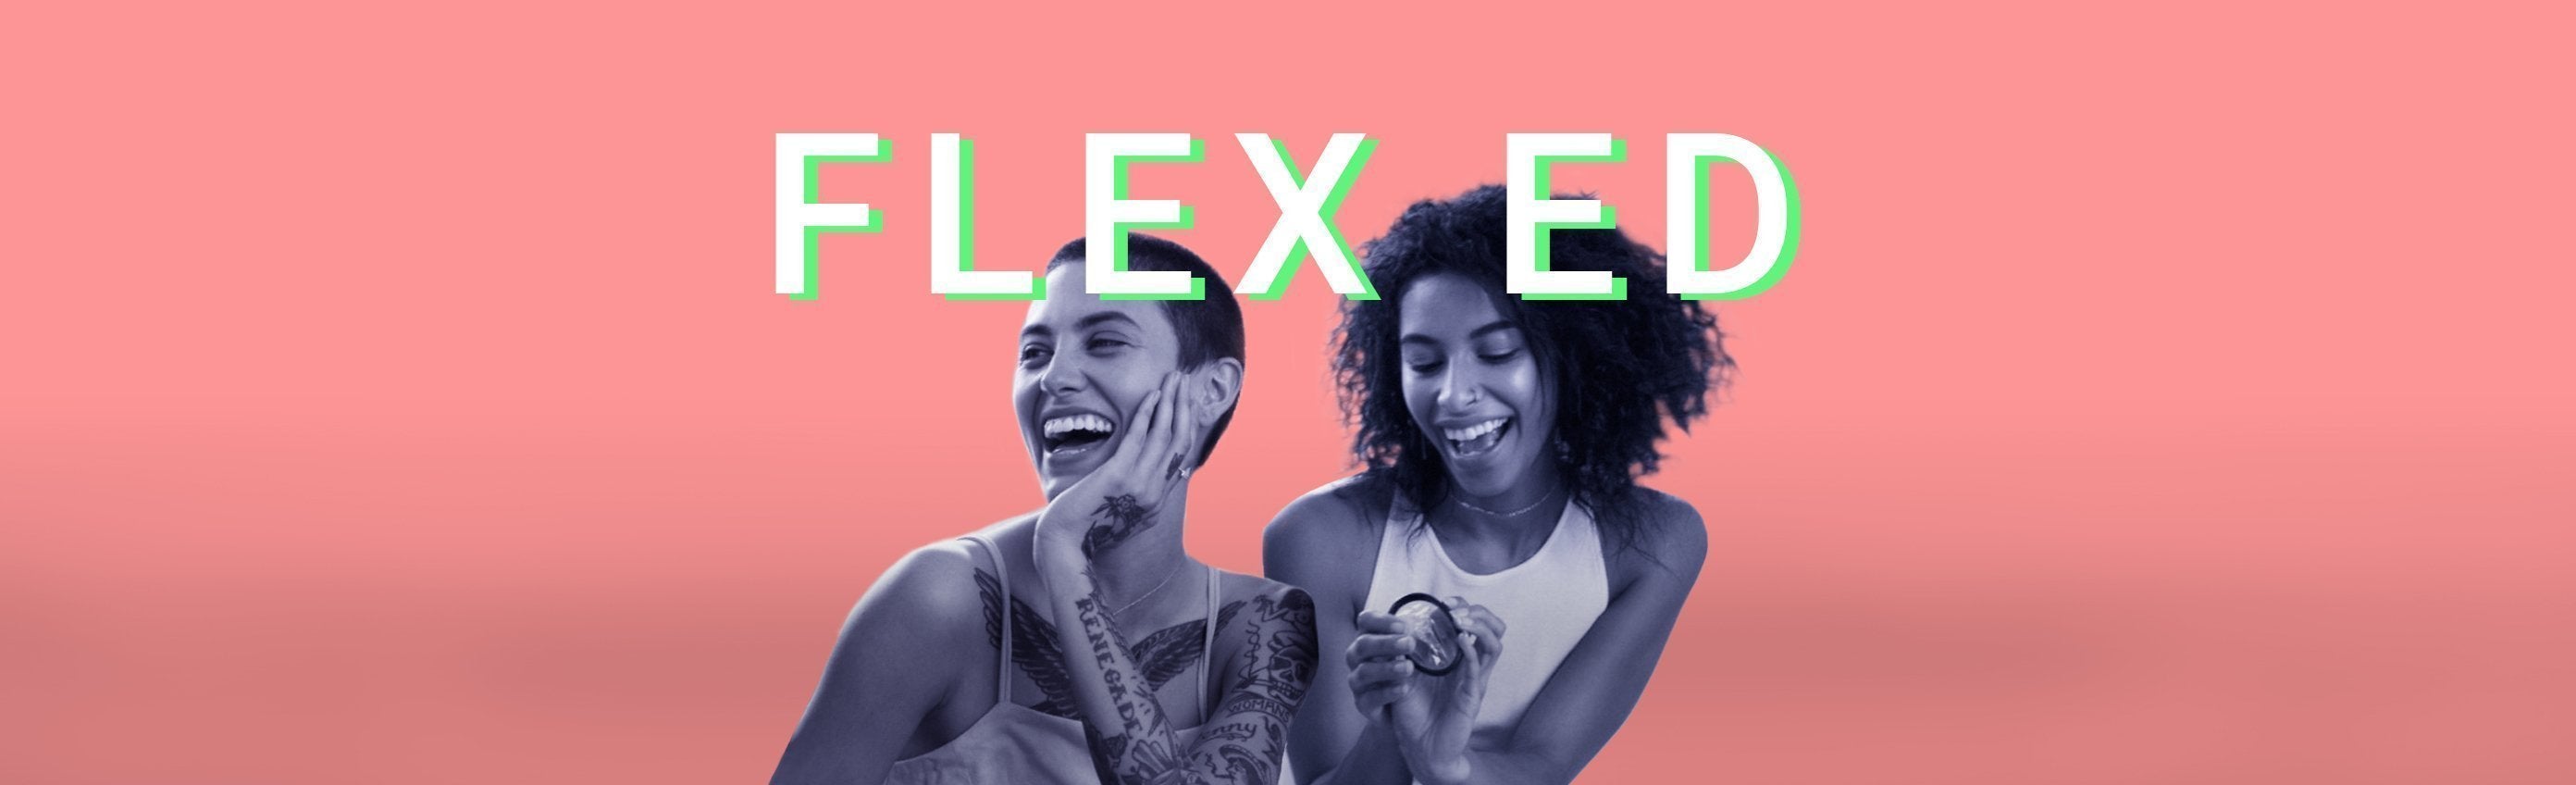 FLEX ED | How To Use Any Brand of Menstrual Cups